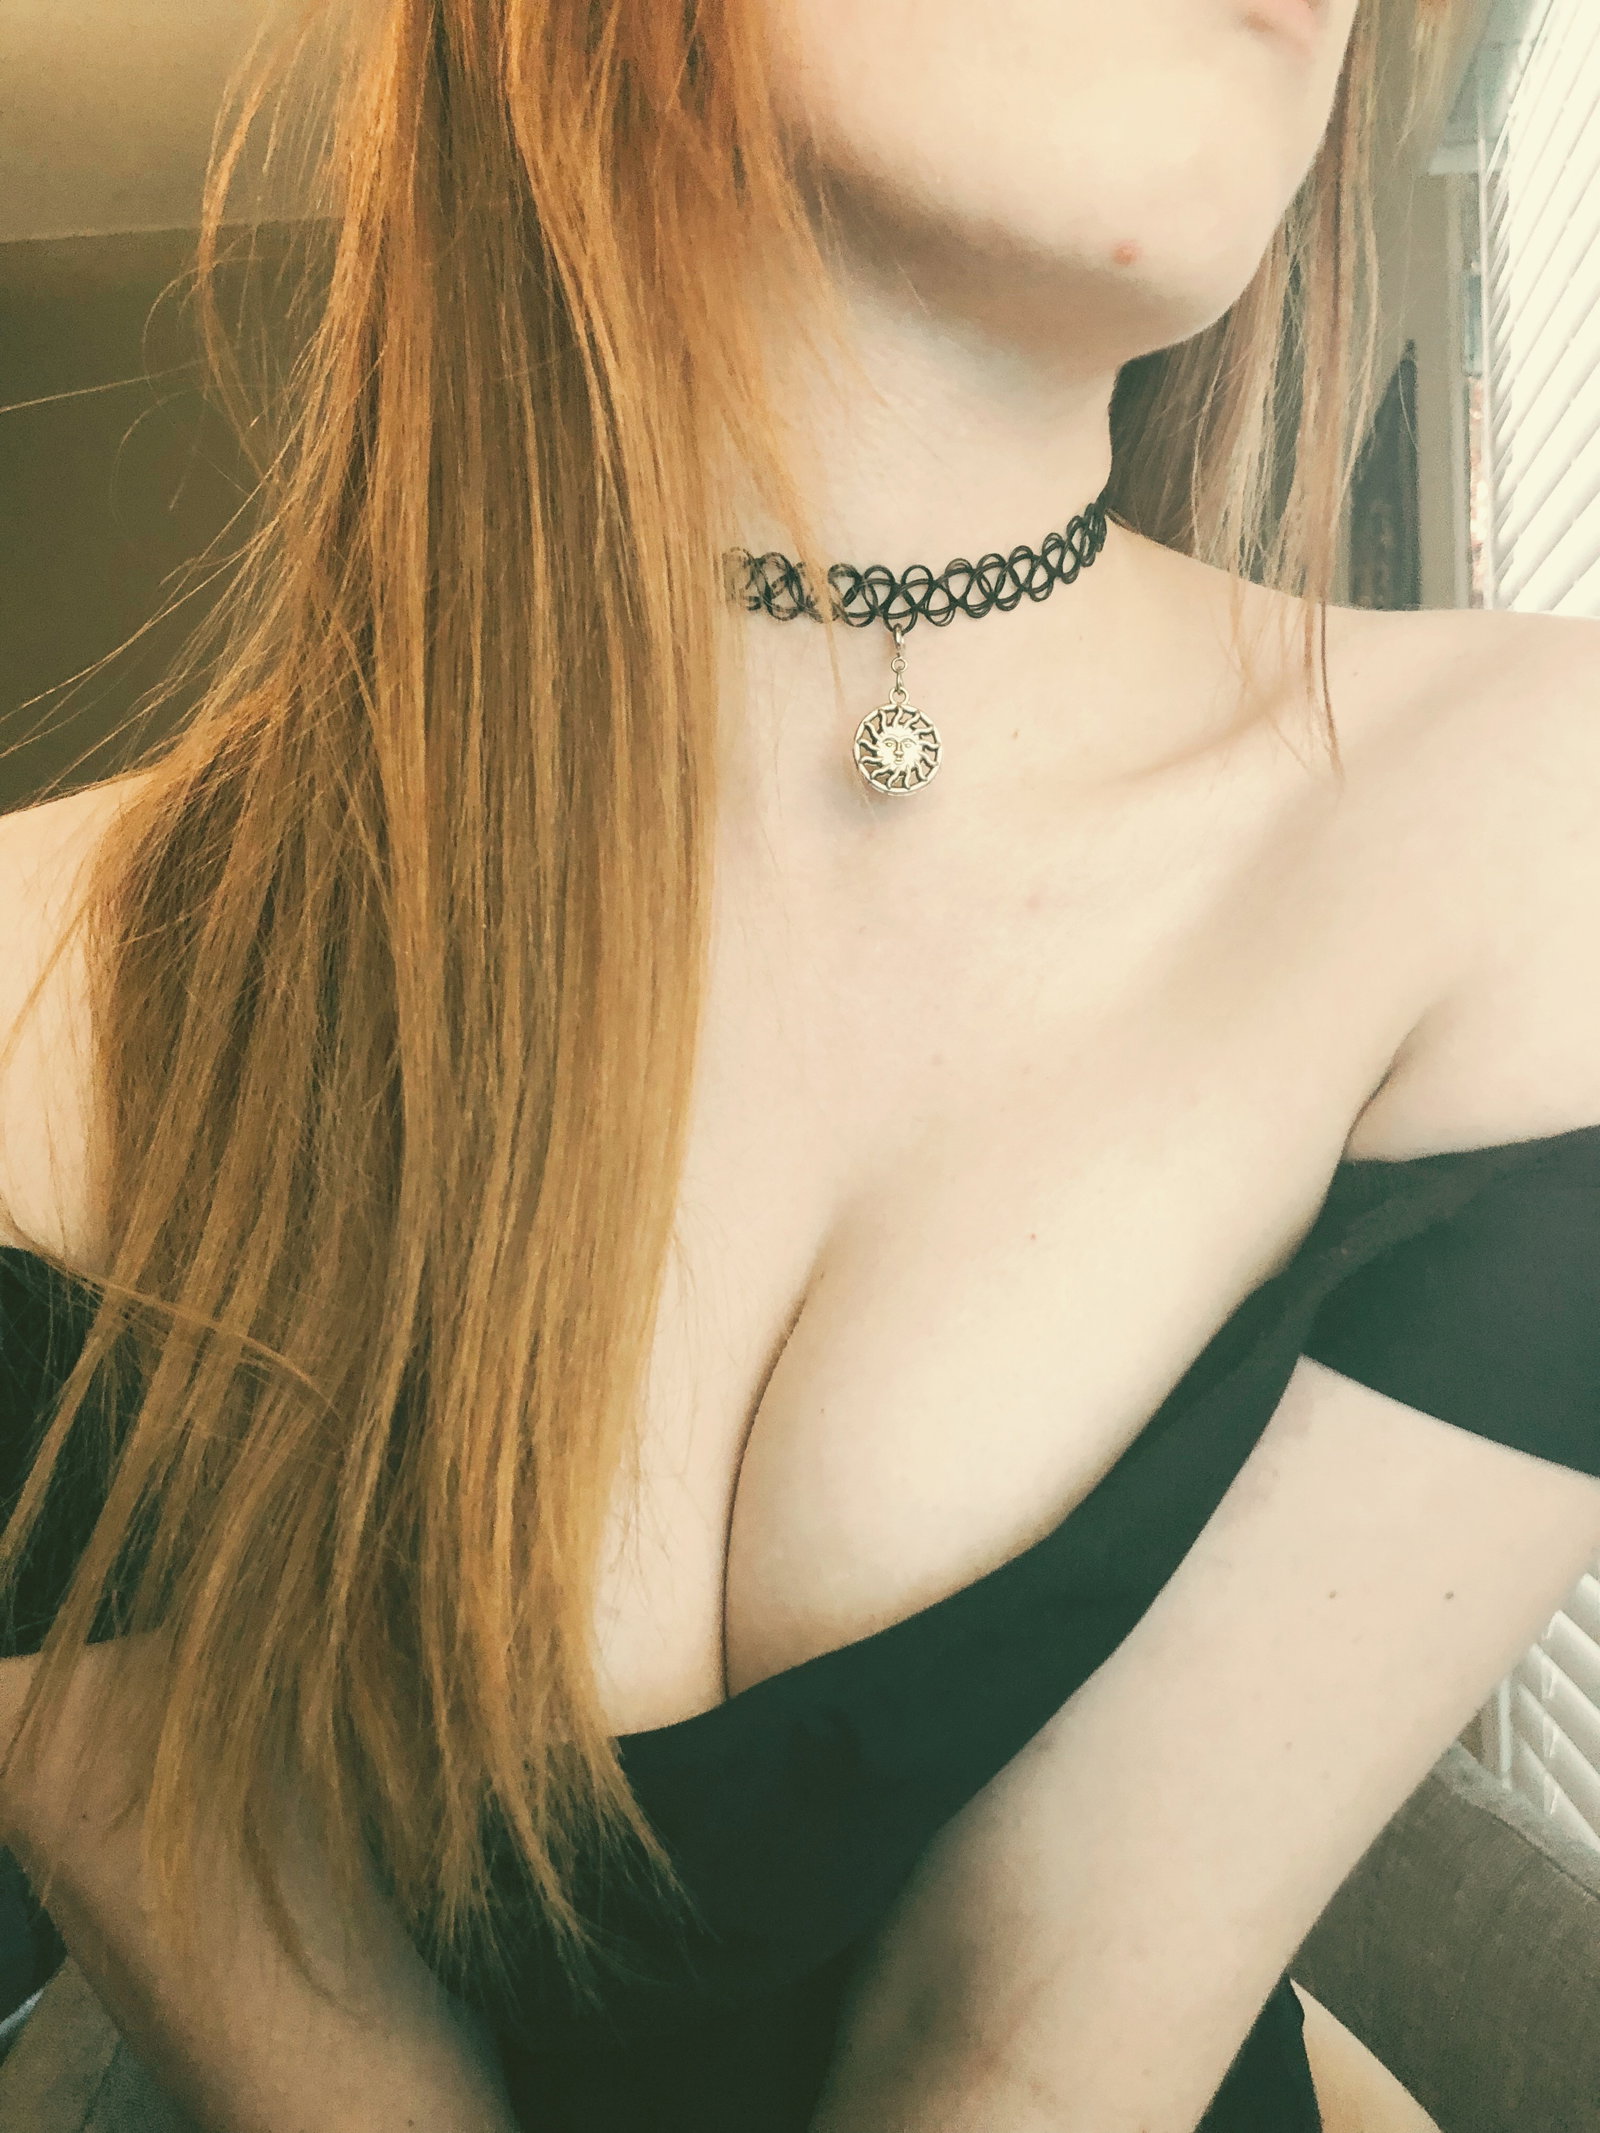 Photo by JennyFae with the username @JennyFae,  December 30, 2018 at 12:50 AM and the text says 'Hit me up on sextpanther
Https://Sextpanther.com/Jenny-fae'